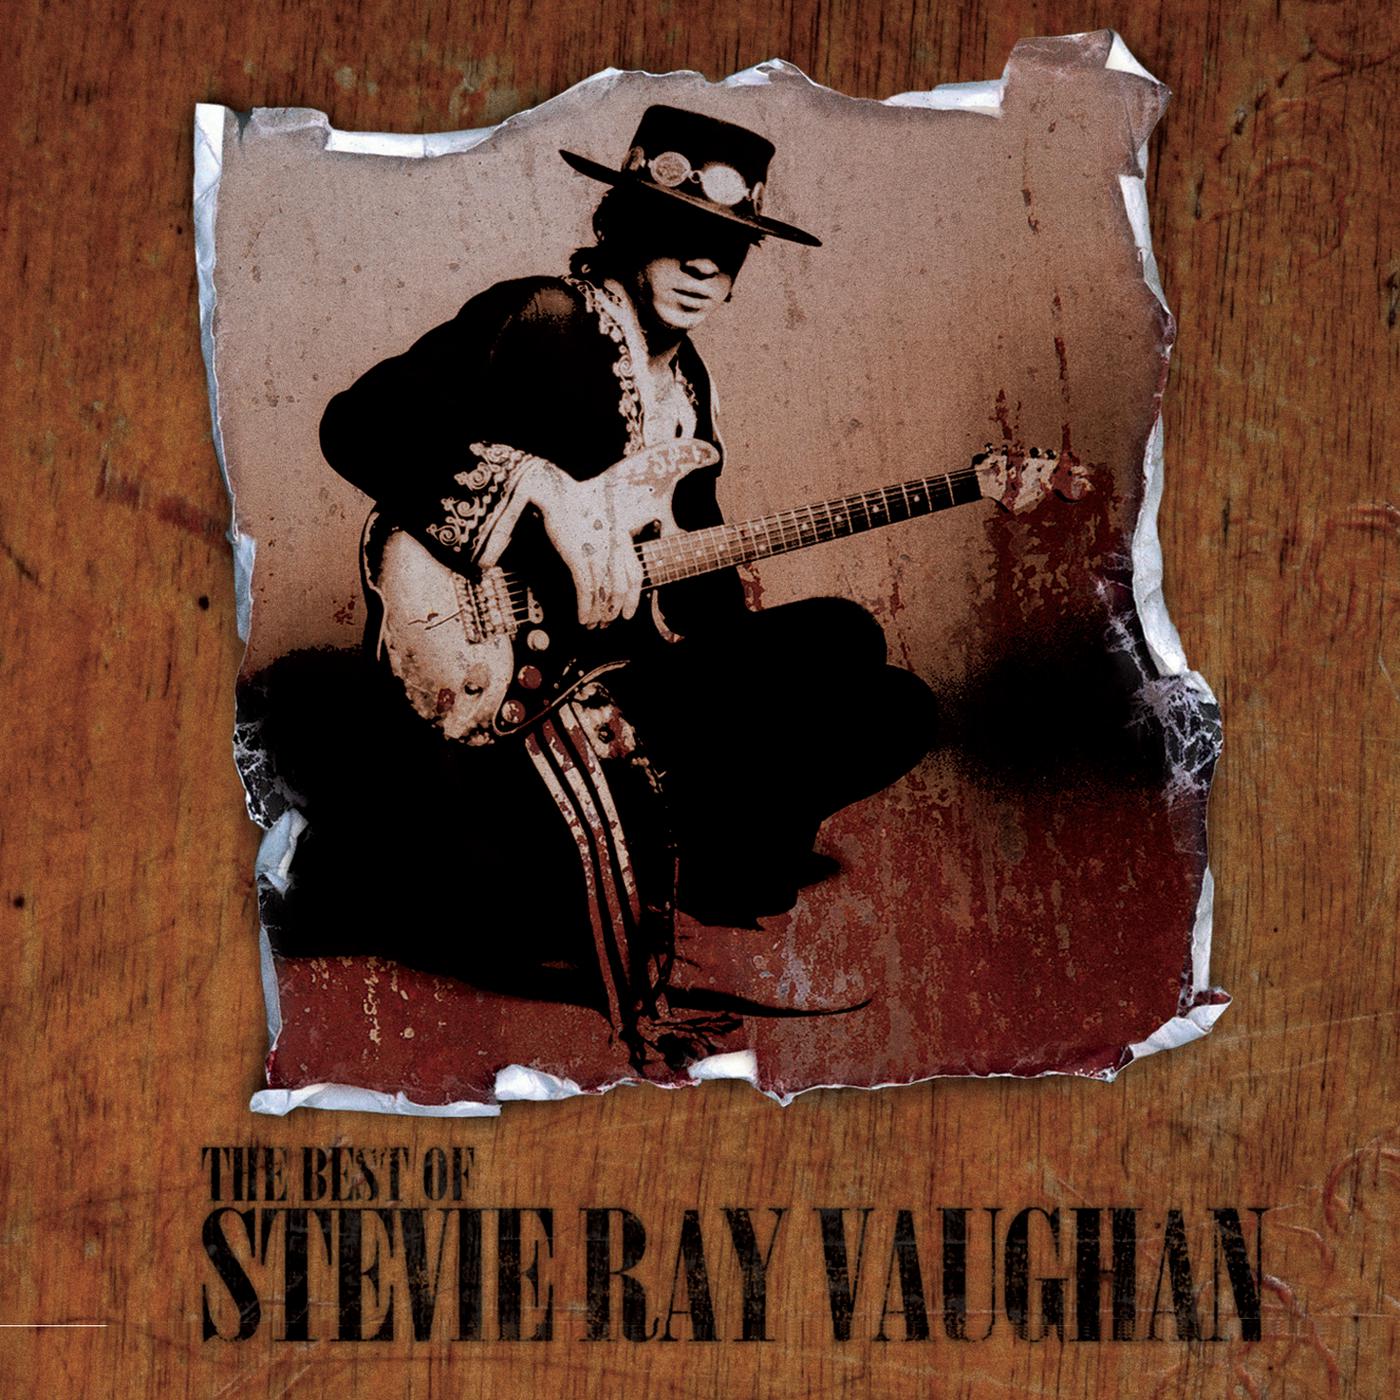 Stevie Ray Vaughan and Double Trouble - Voodoo Child (Slight Return) (Live)